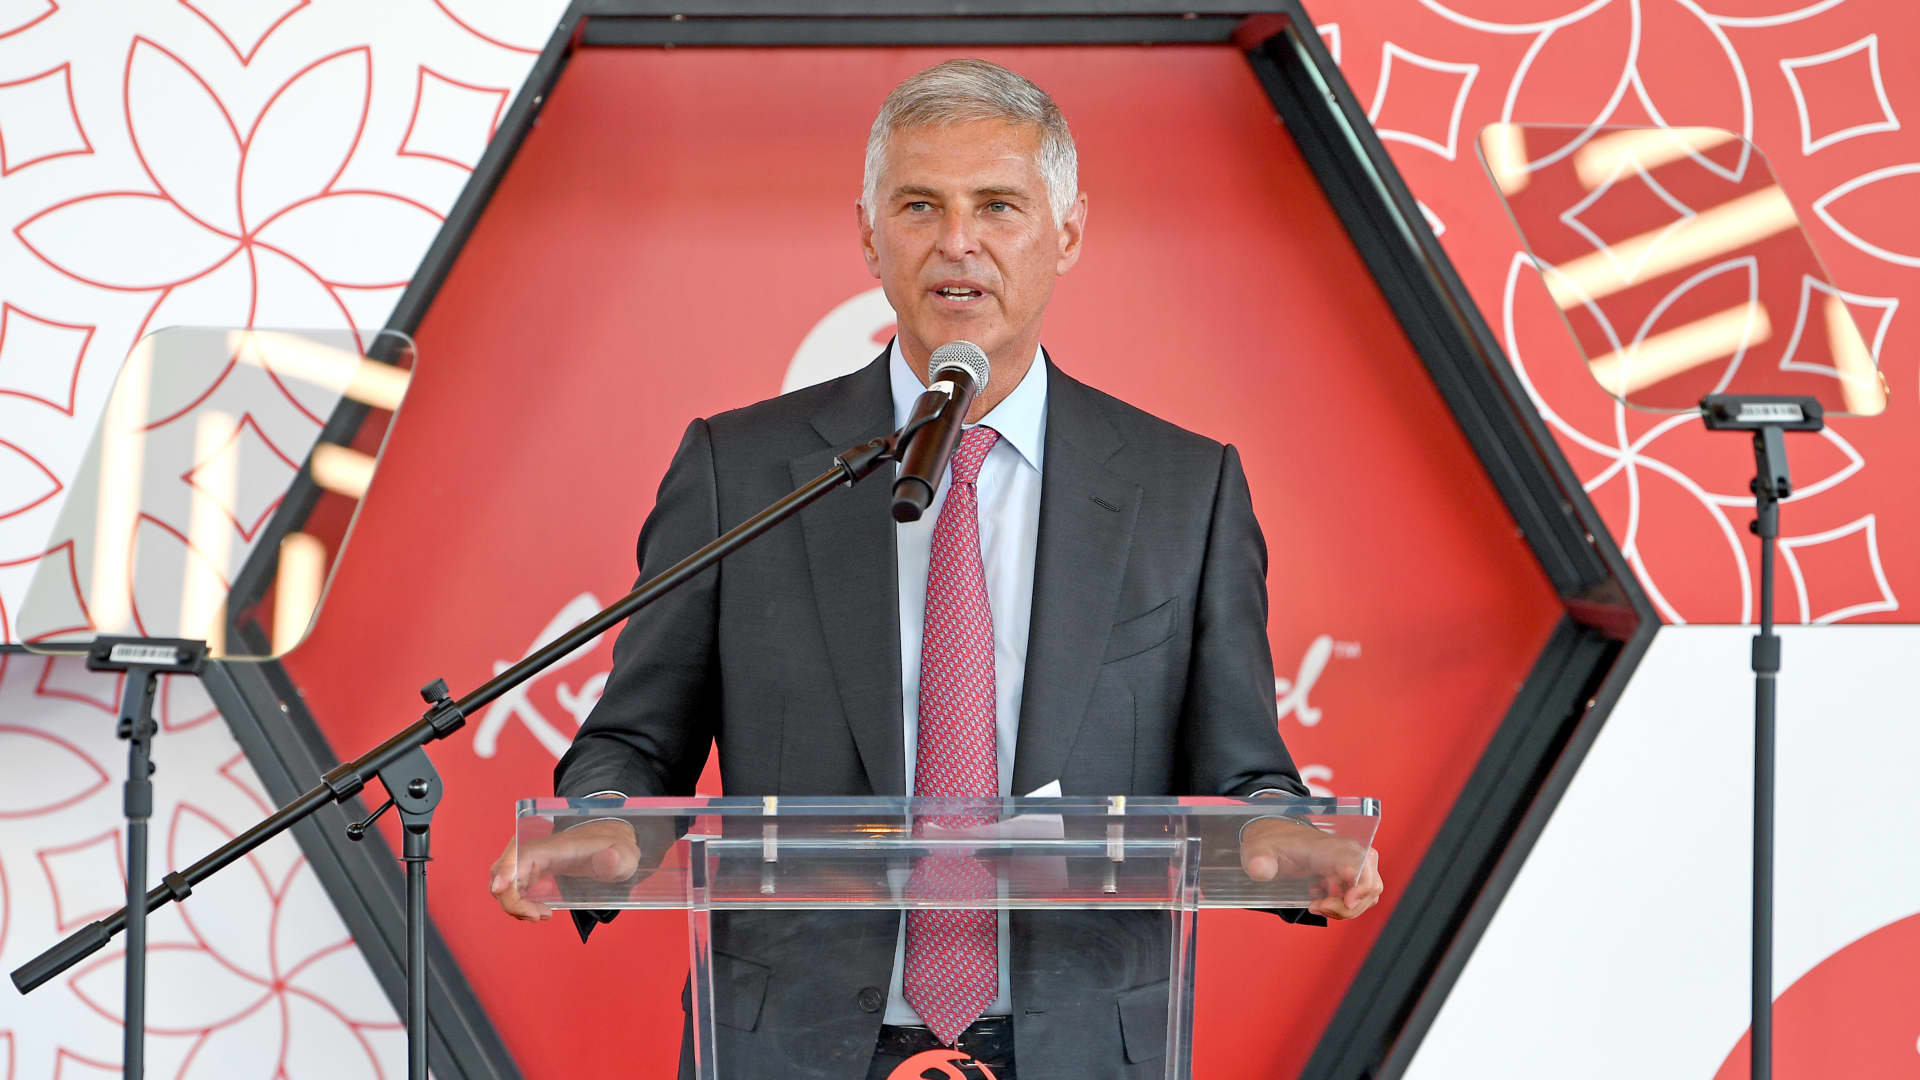 President & Chief Executive Officer of Hilton Christopher J. Nassetta speaks onstage during the Resorts World Las Vegas Grand Opening on June 24, 2021 in Las Vegas, Nevada.